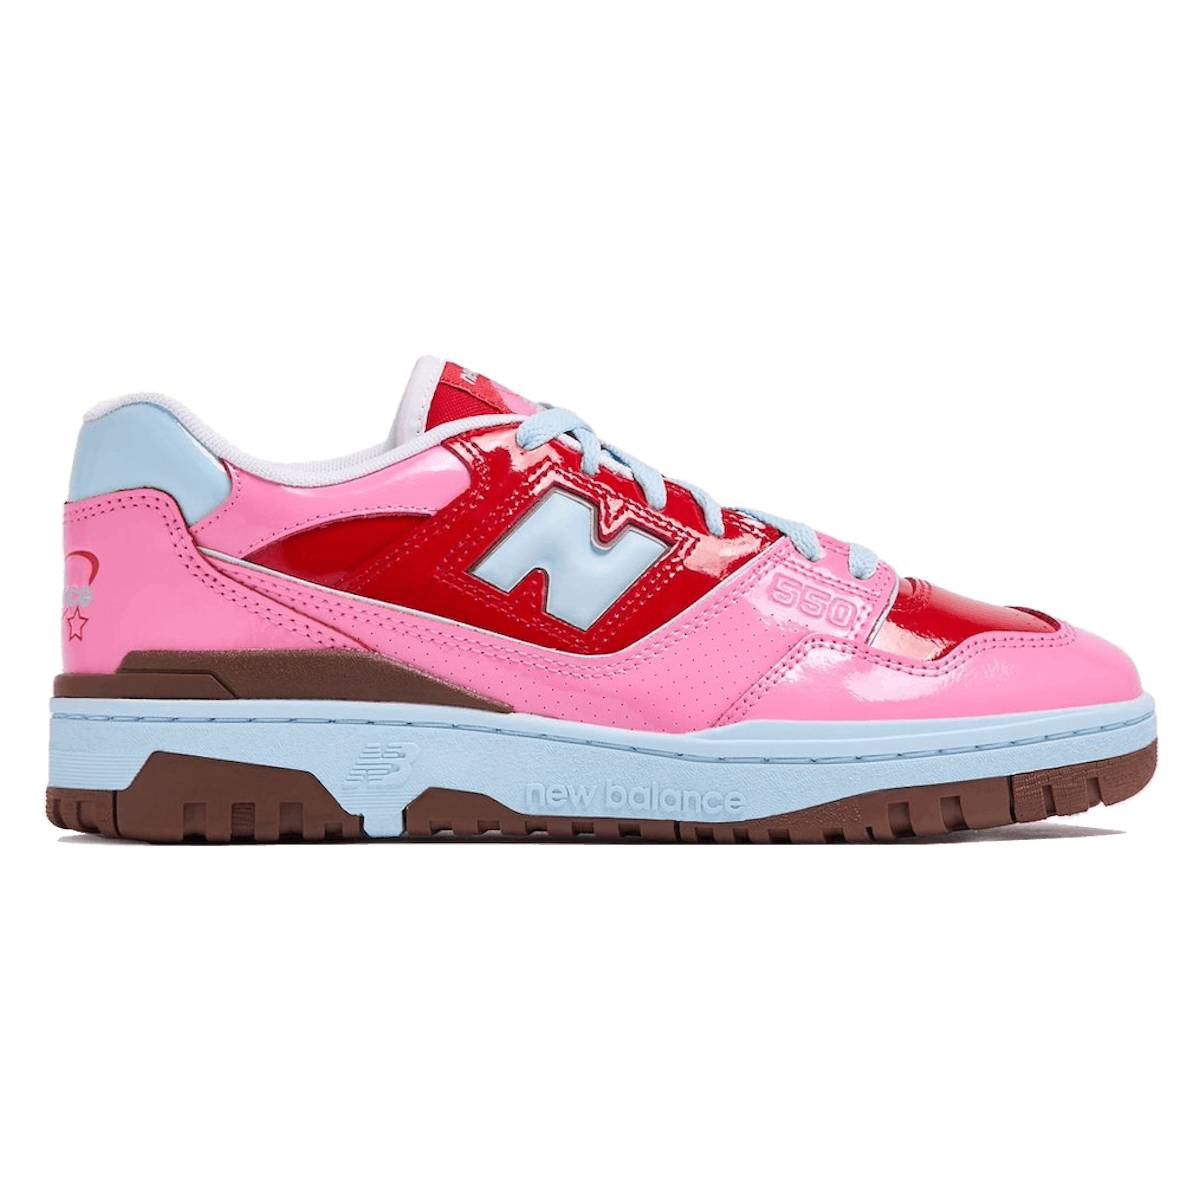 New Balance 550 Y2K Patent Leather "Red/Pink"